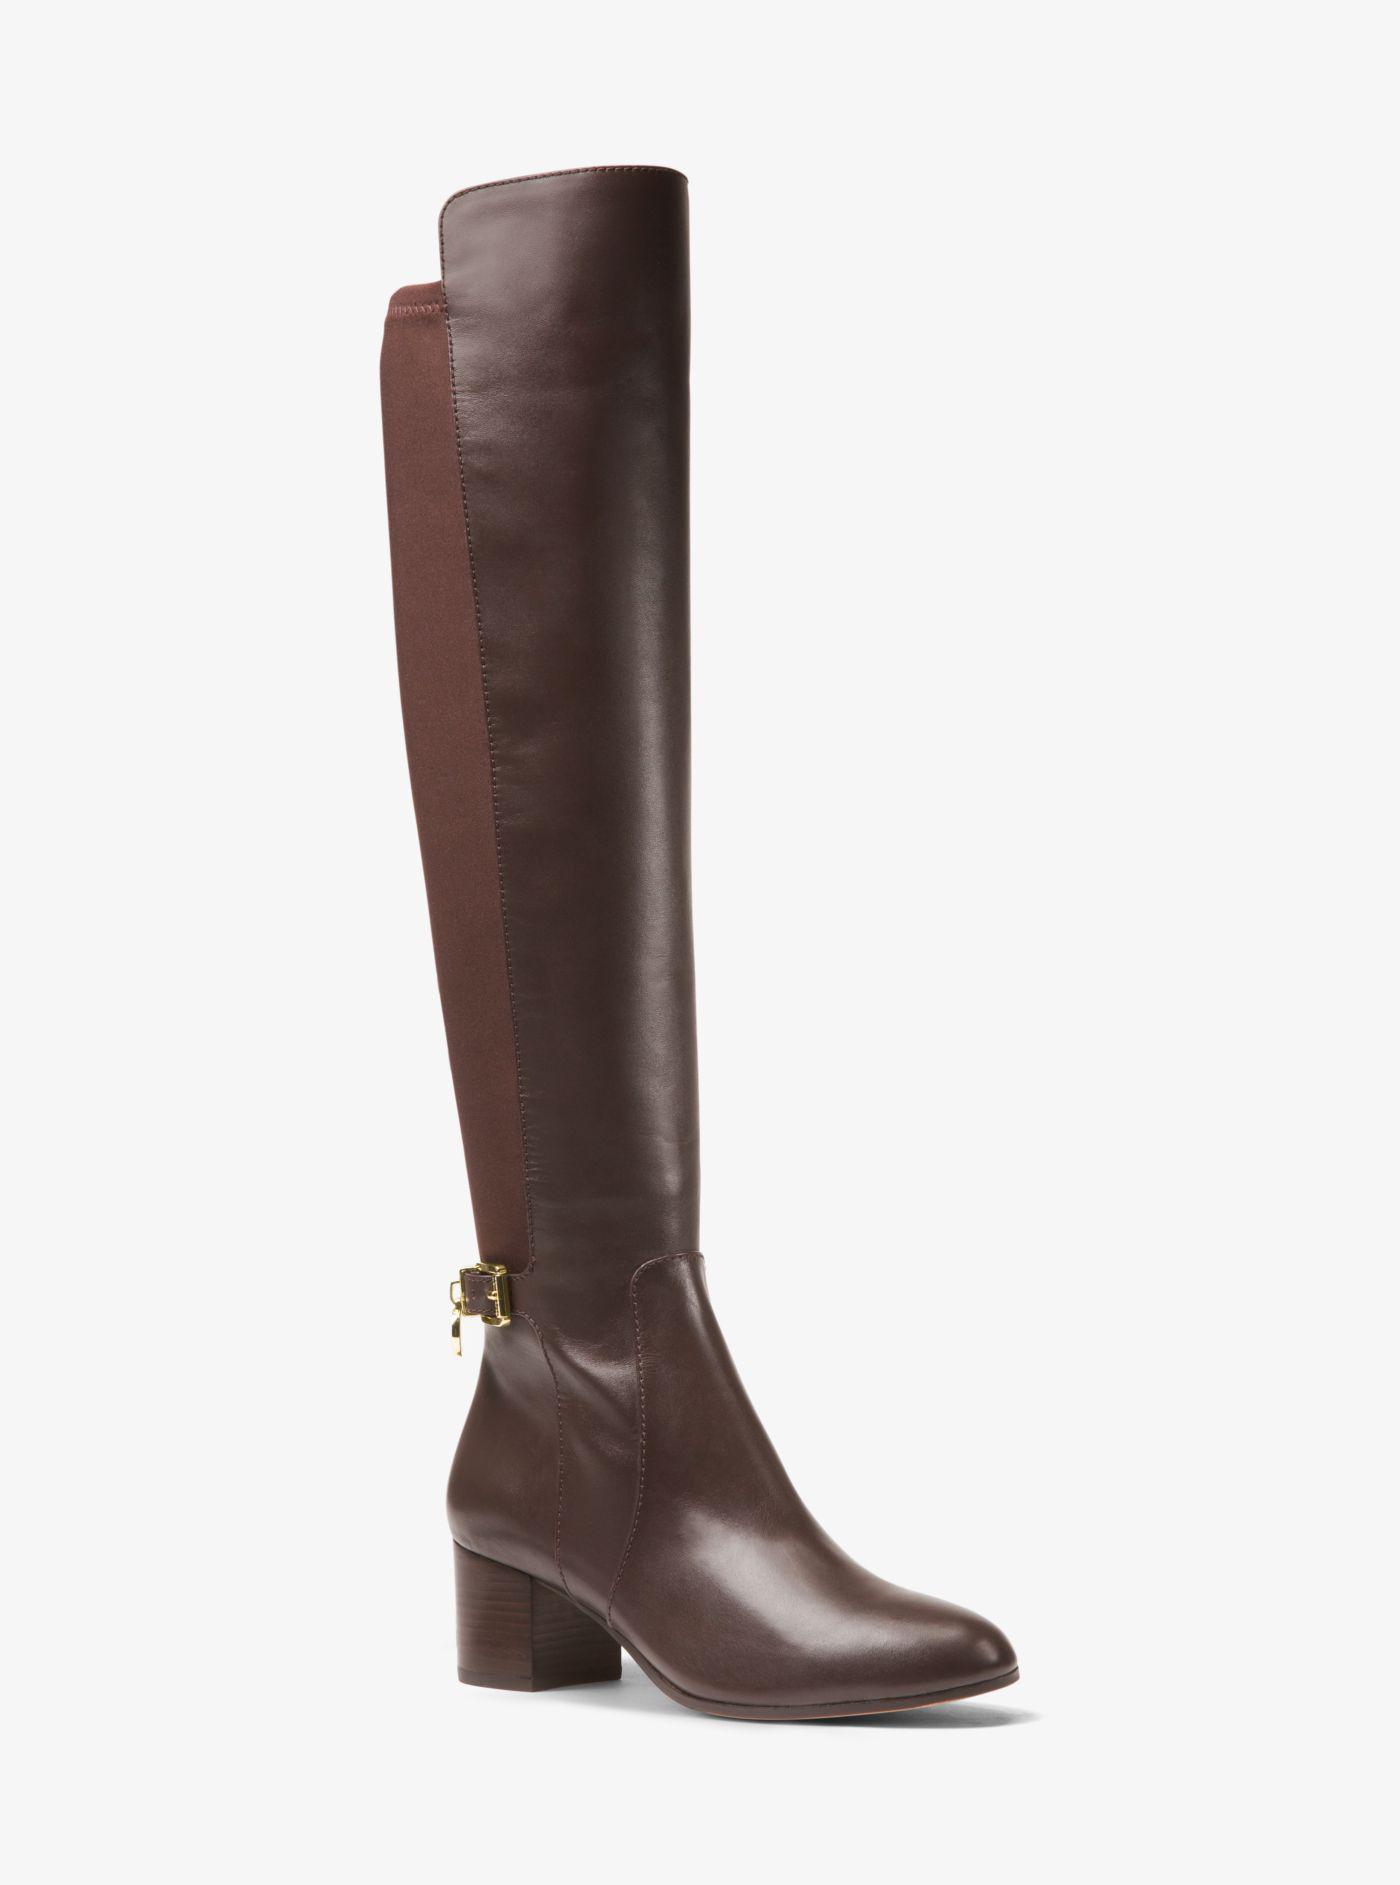 Michael Kors Aileen Leather Boot in 